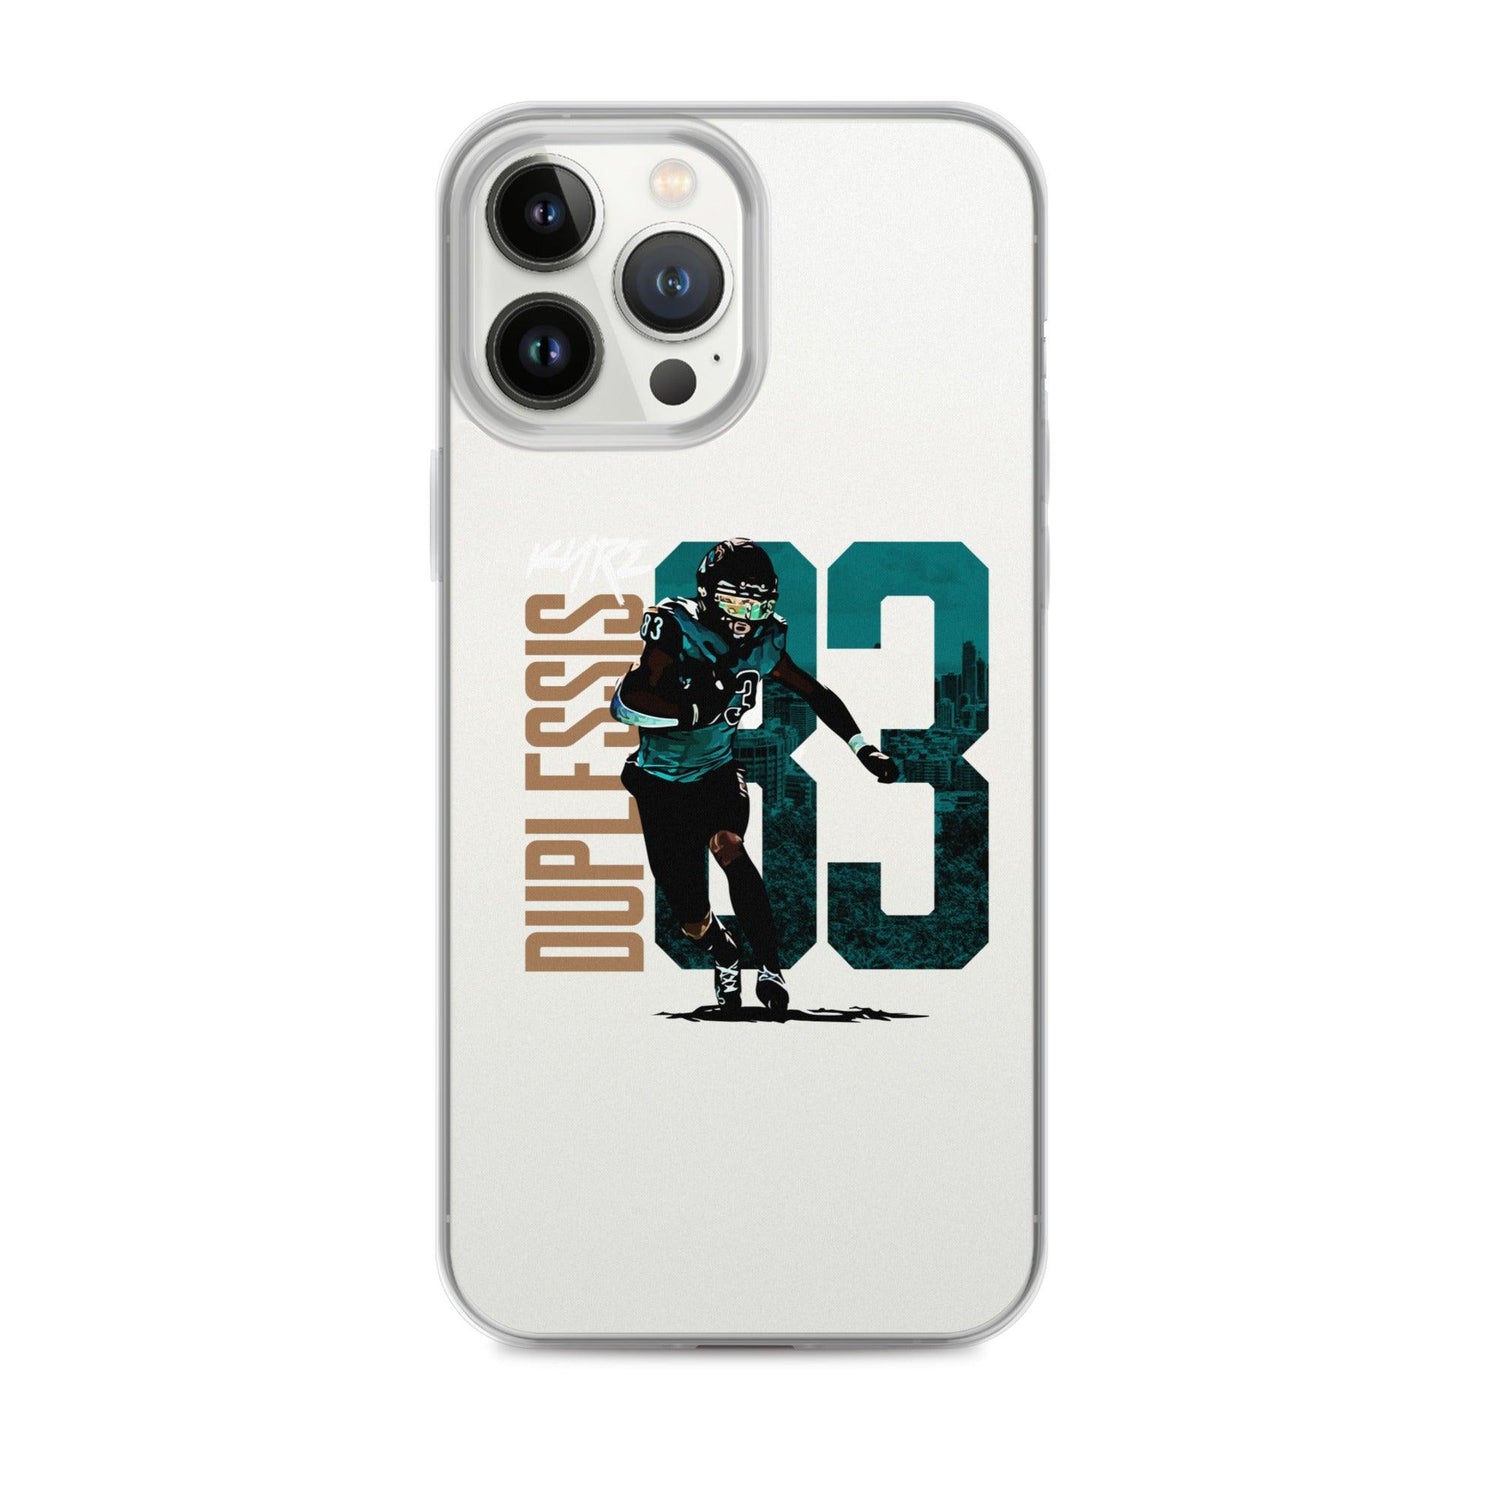 Kyre Duplessis "Gameday" iPhone Case - Fan Arch